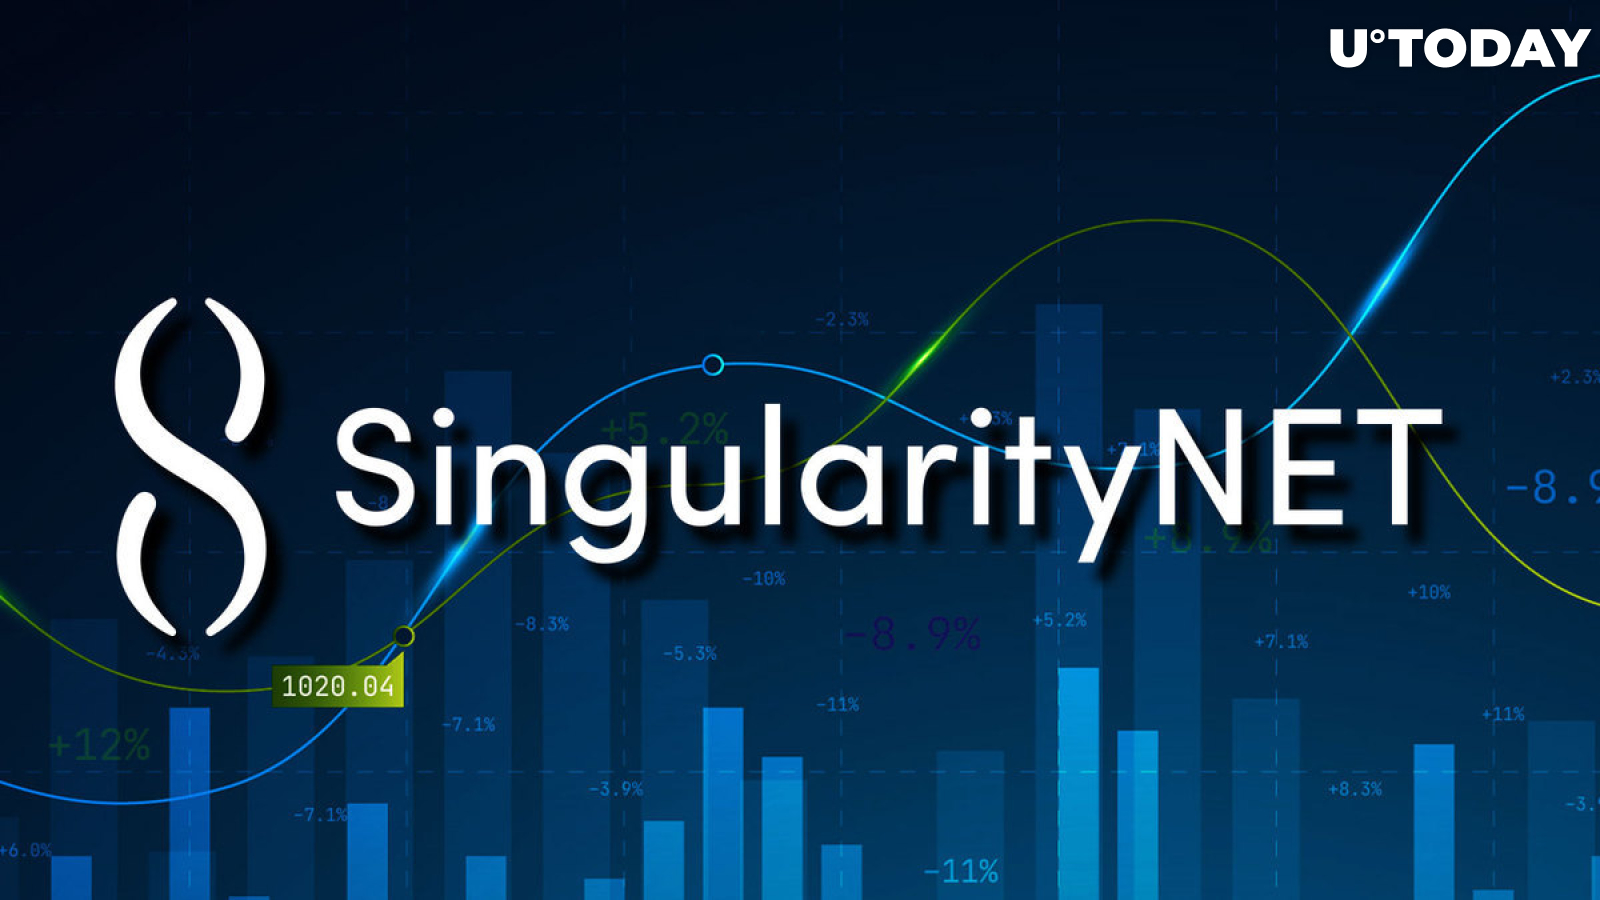 SingularityNET (AGIX) up 31% After Announcing Partnership With Cardano: Details